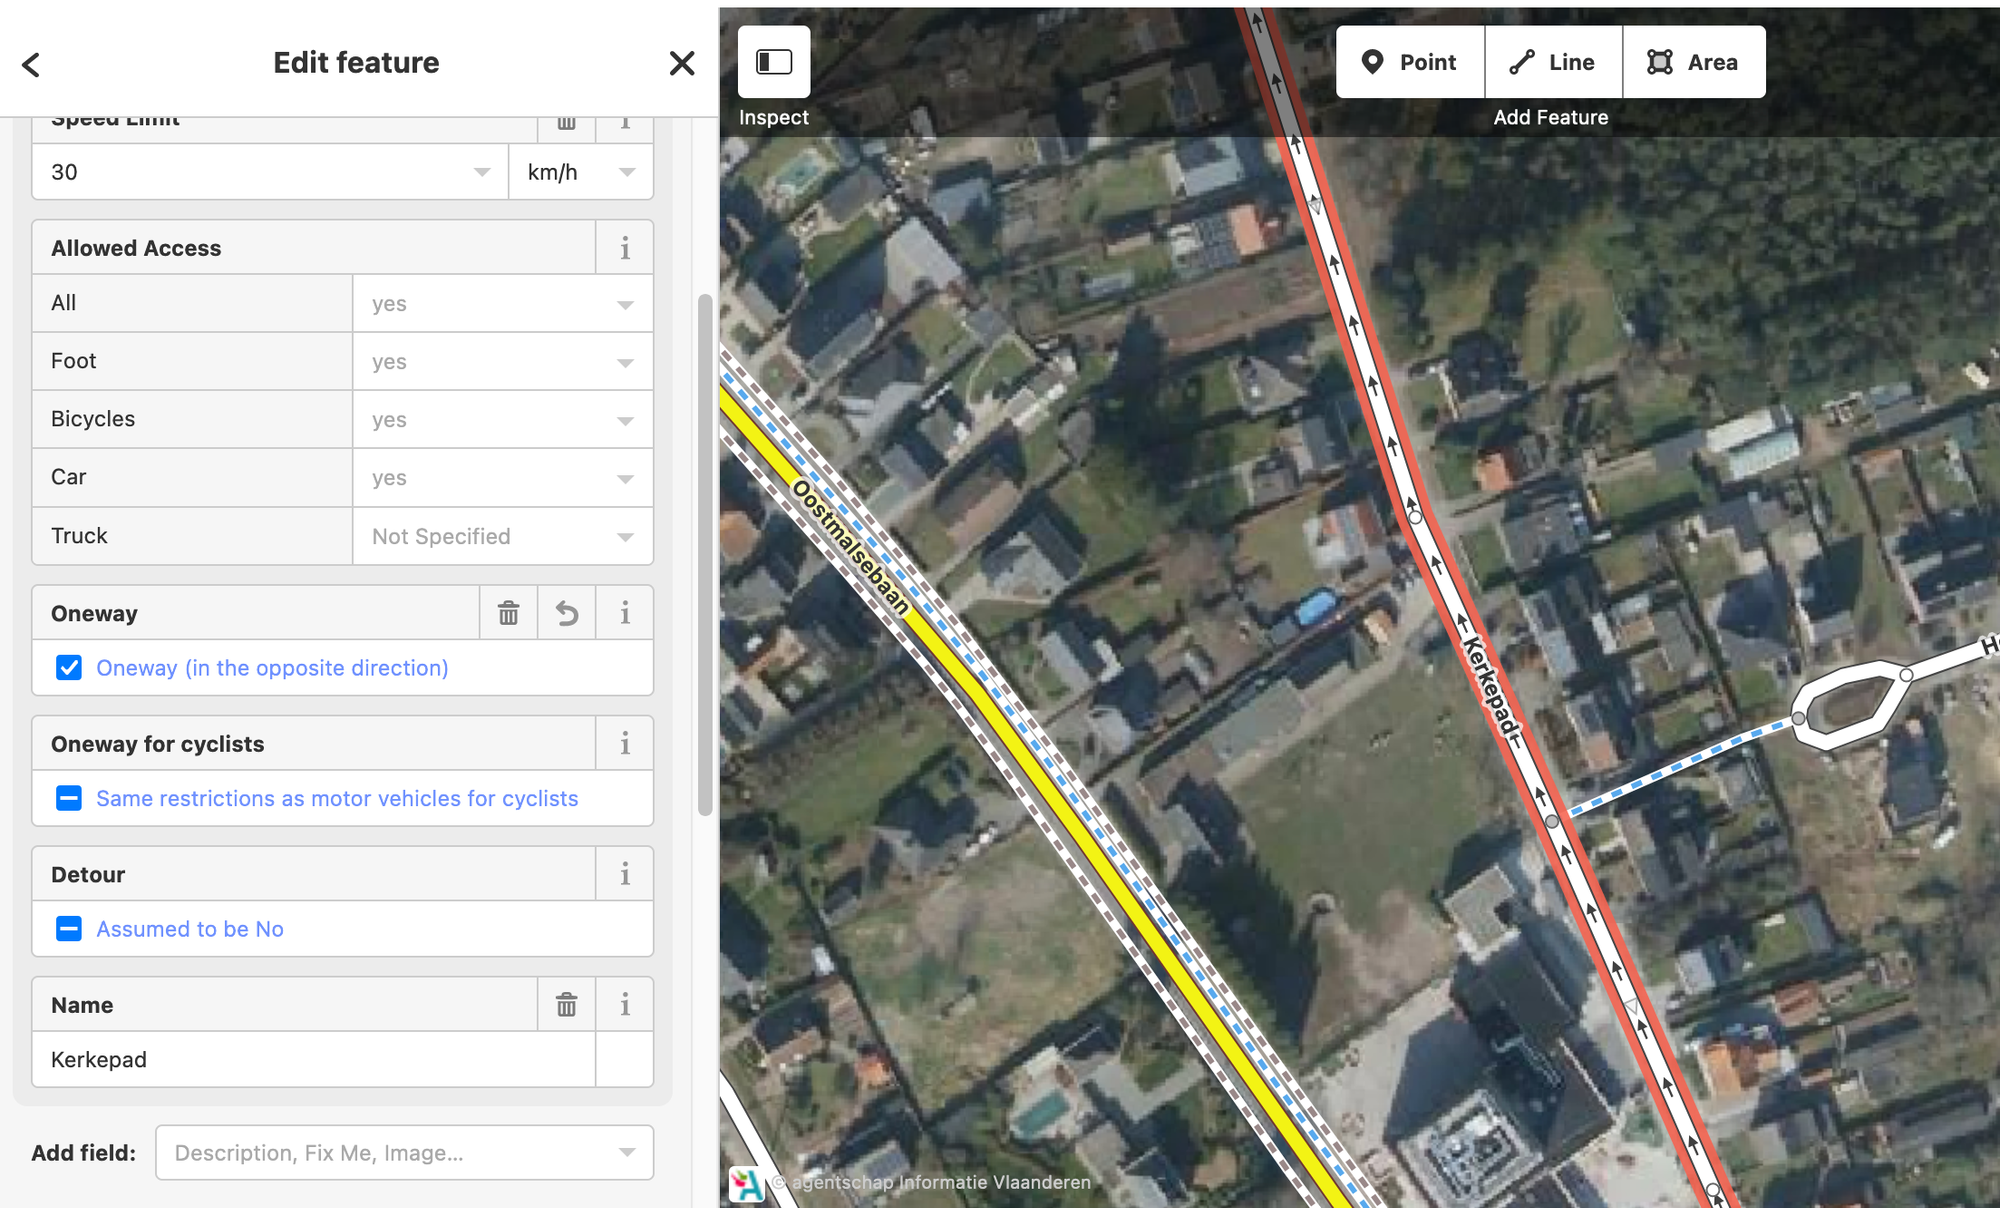 You can select a road in the editor by clicking on it. Details are shown on the left.